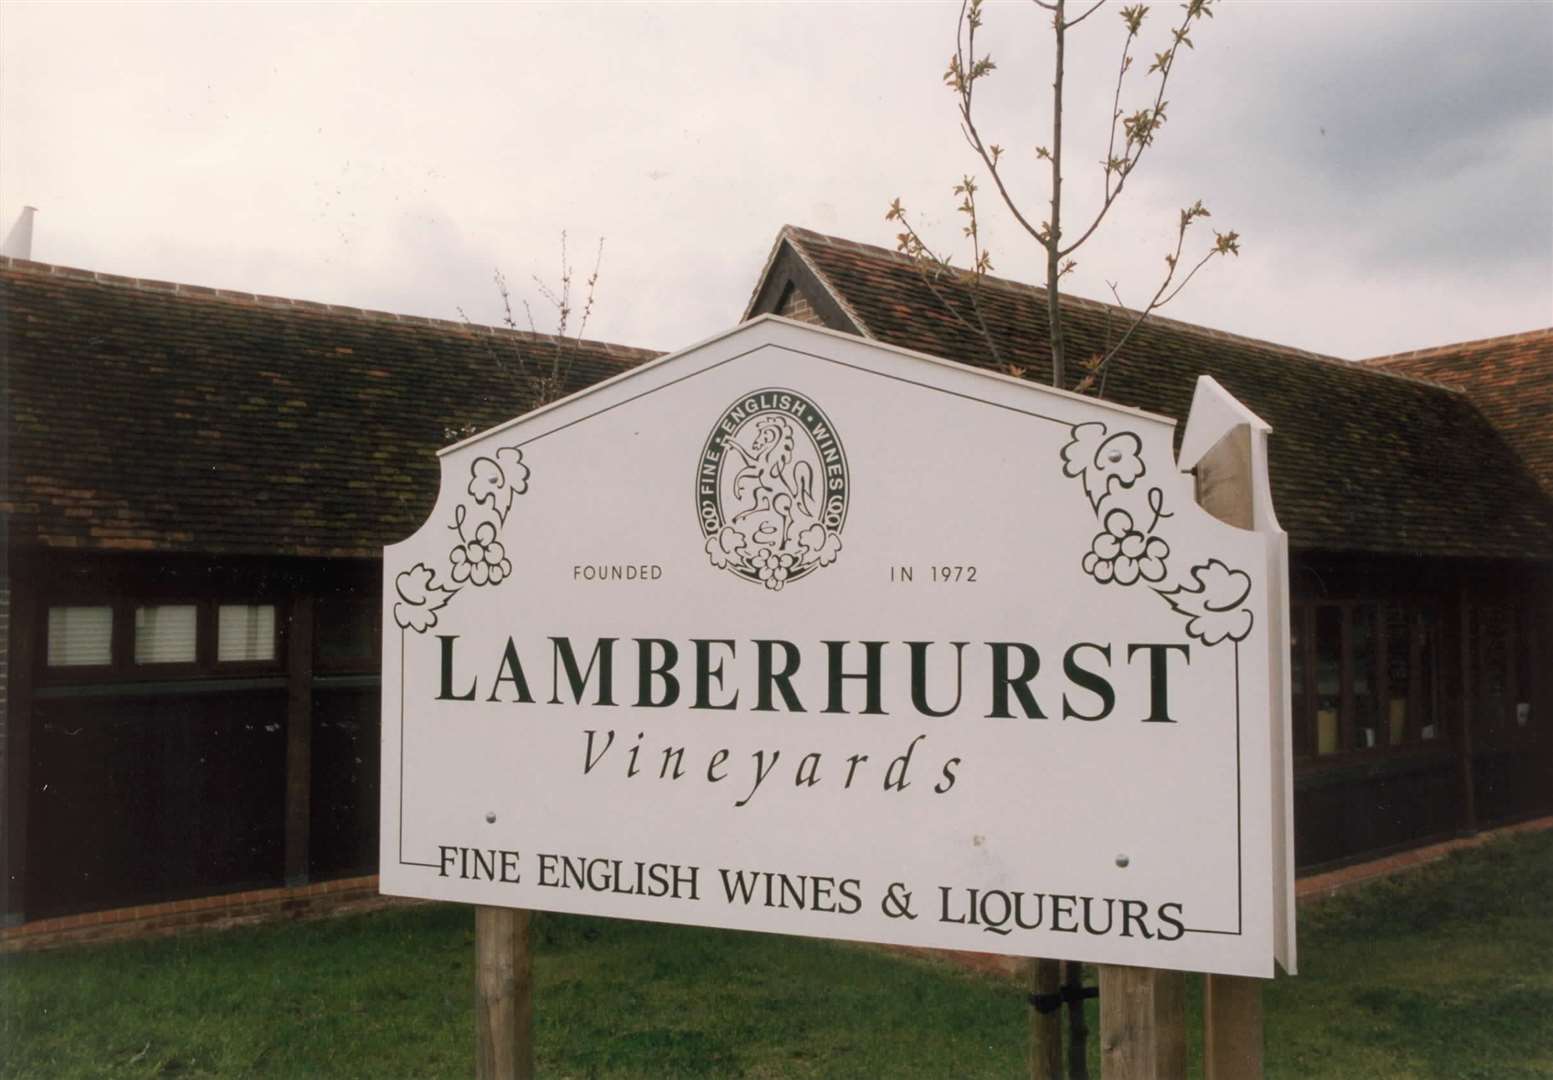 Back in 1977, the vineyard was one of England's first commercial wineries